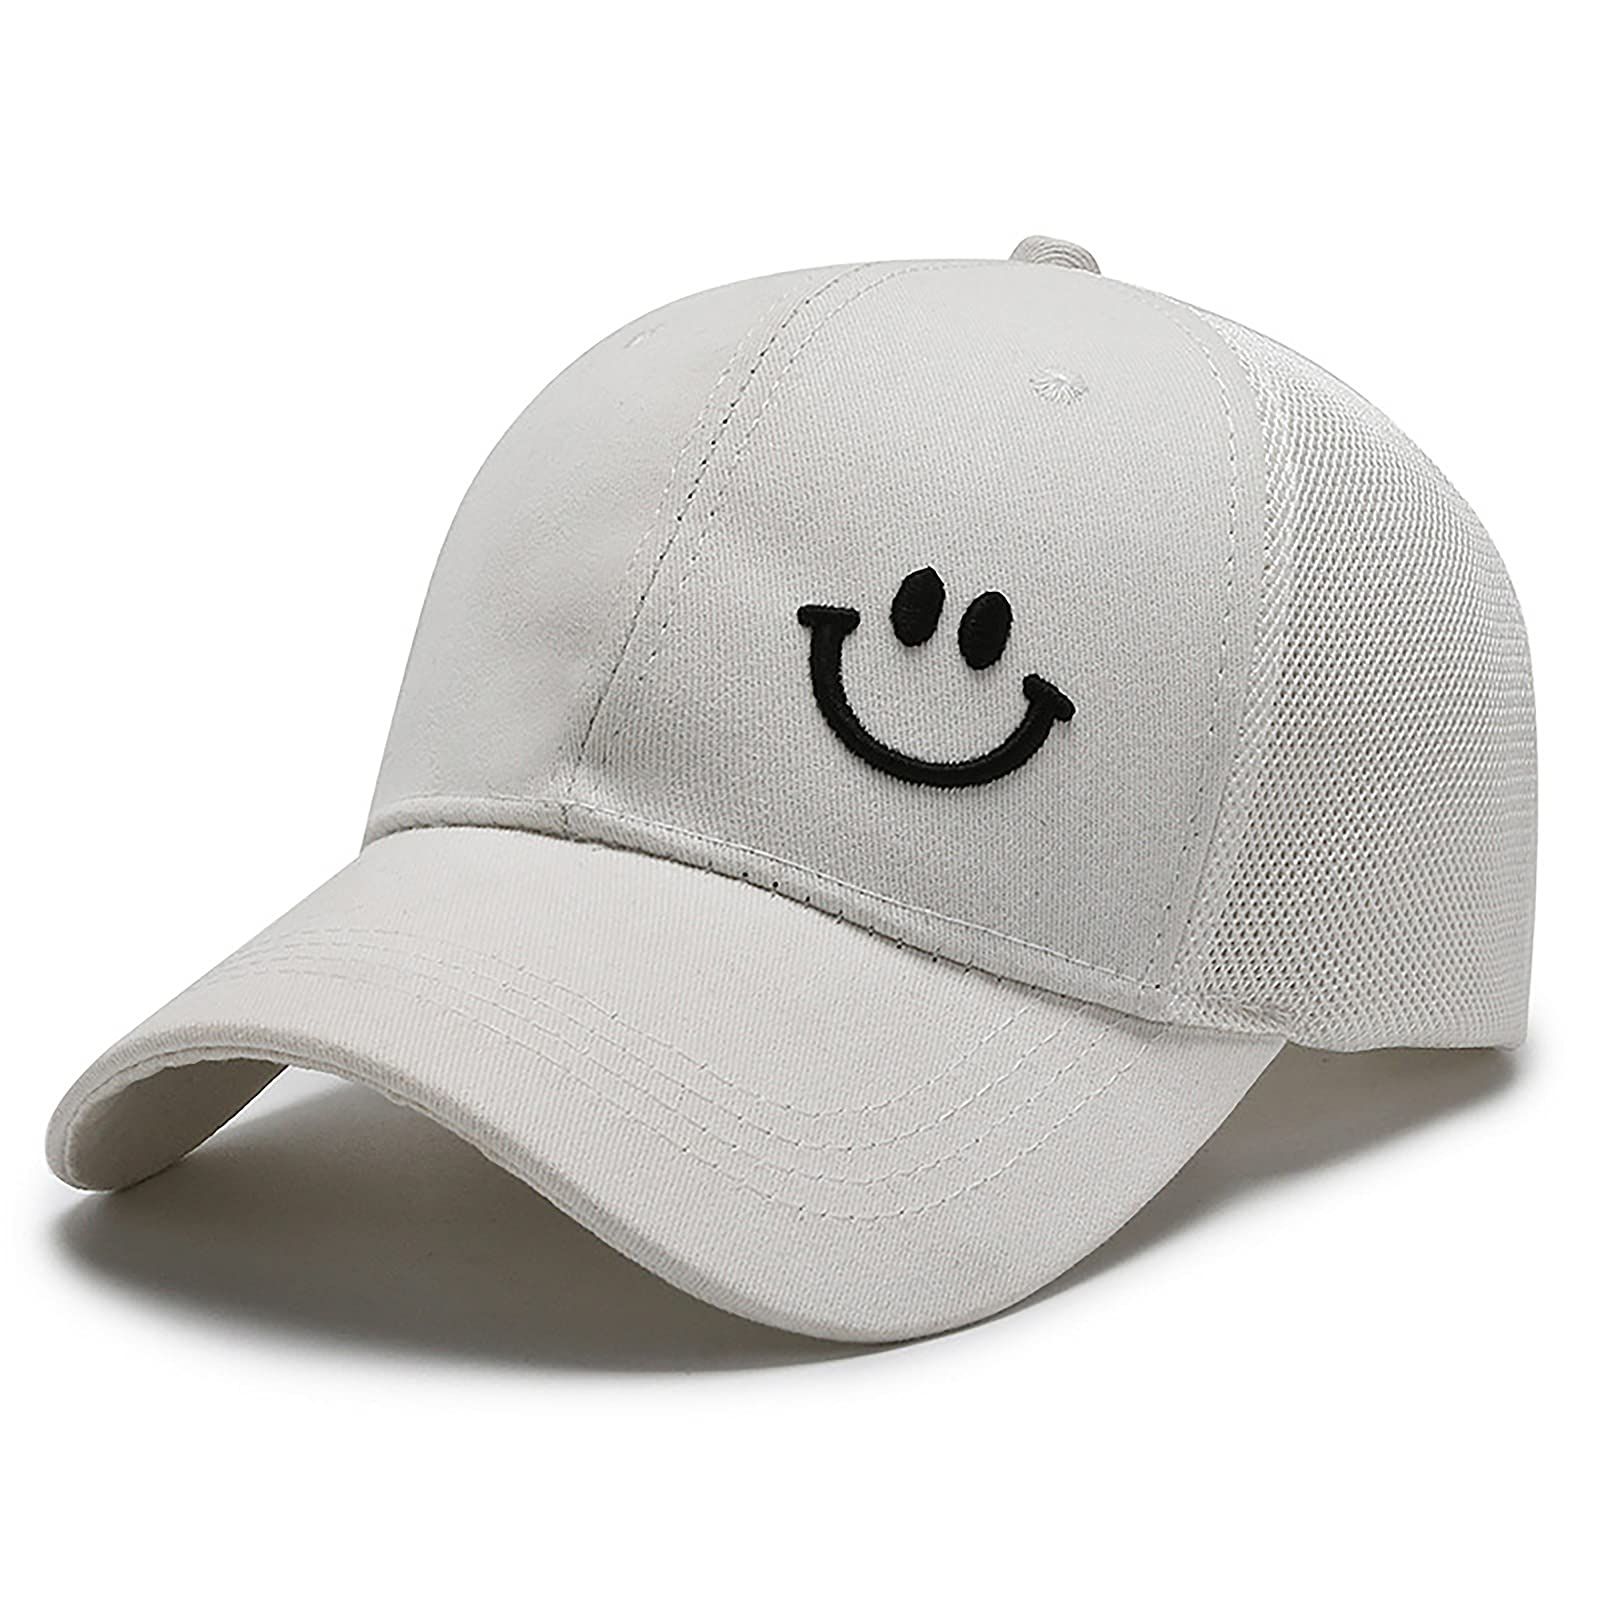 Smiley Face Hat - Trendy Y2K Smiley Face Tucker Hat Embroidery Smiley Cap for Women Man | Amazon (US)